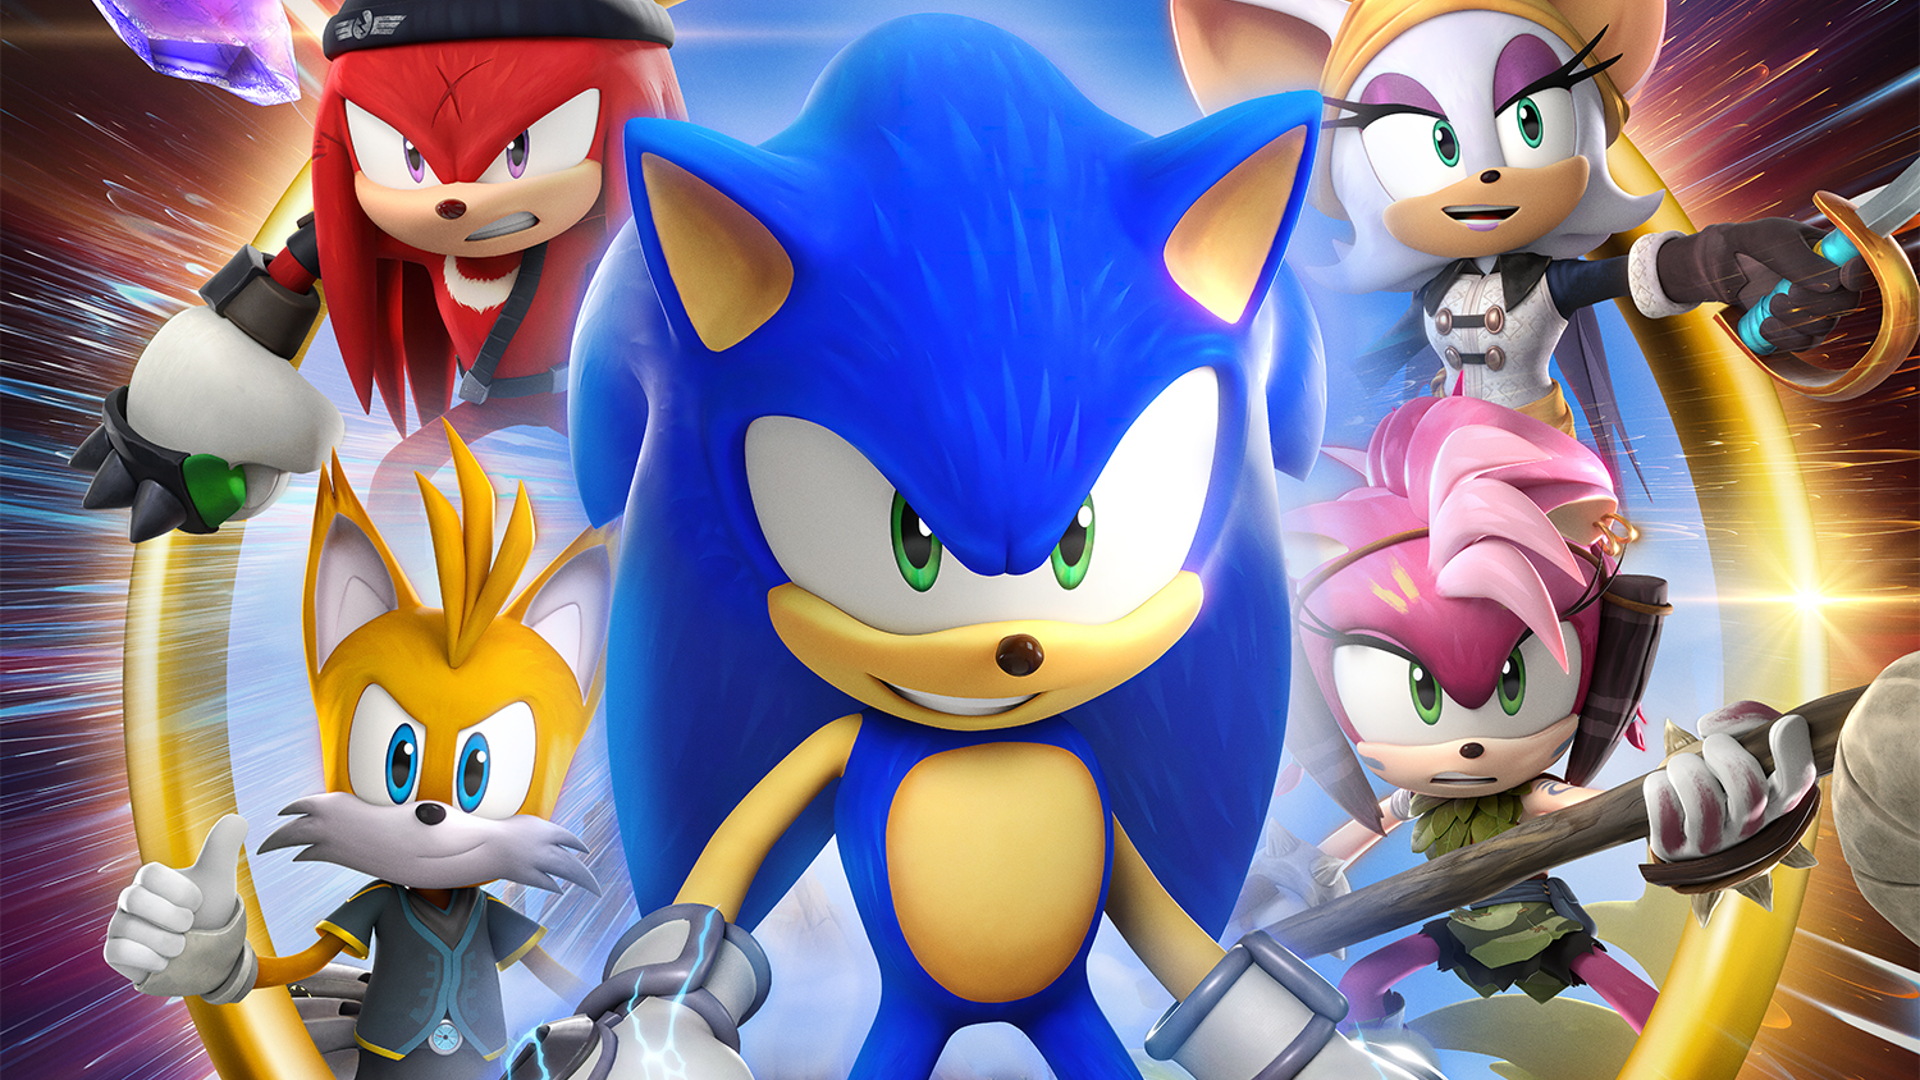 Sonic Prime 3D Animated Series Debuts on December 15 - News